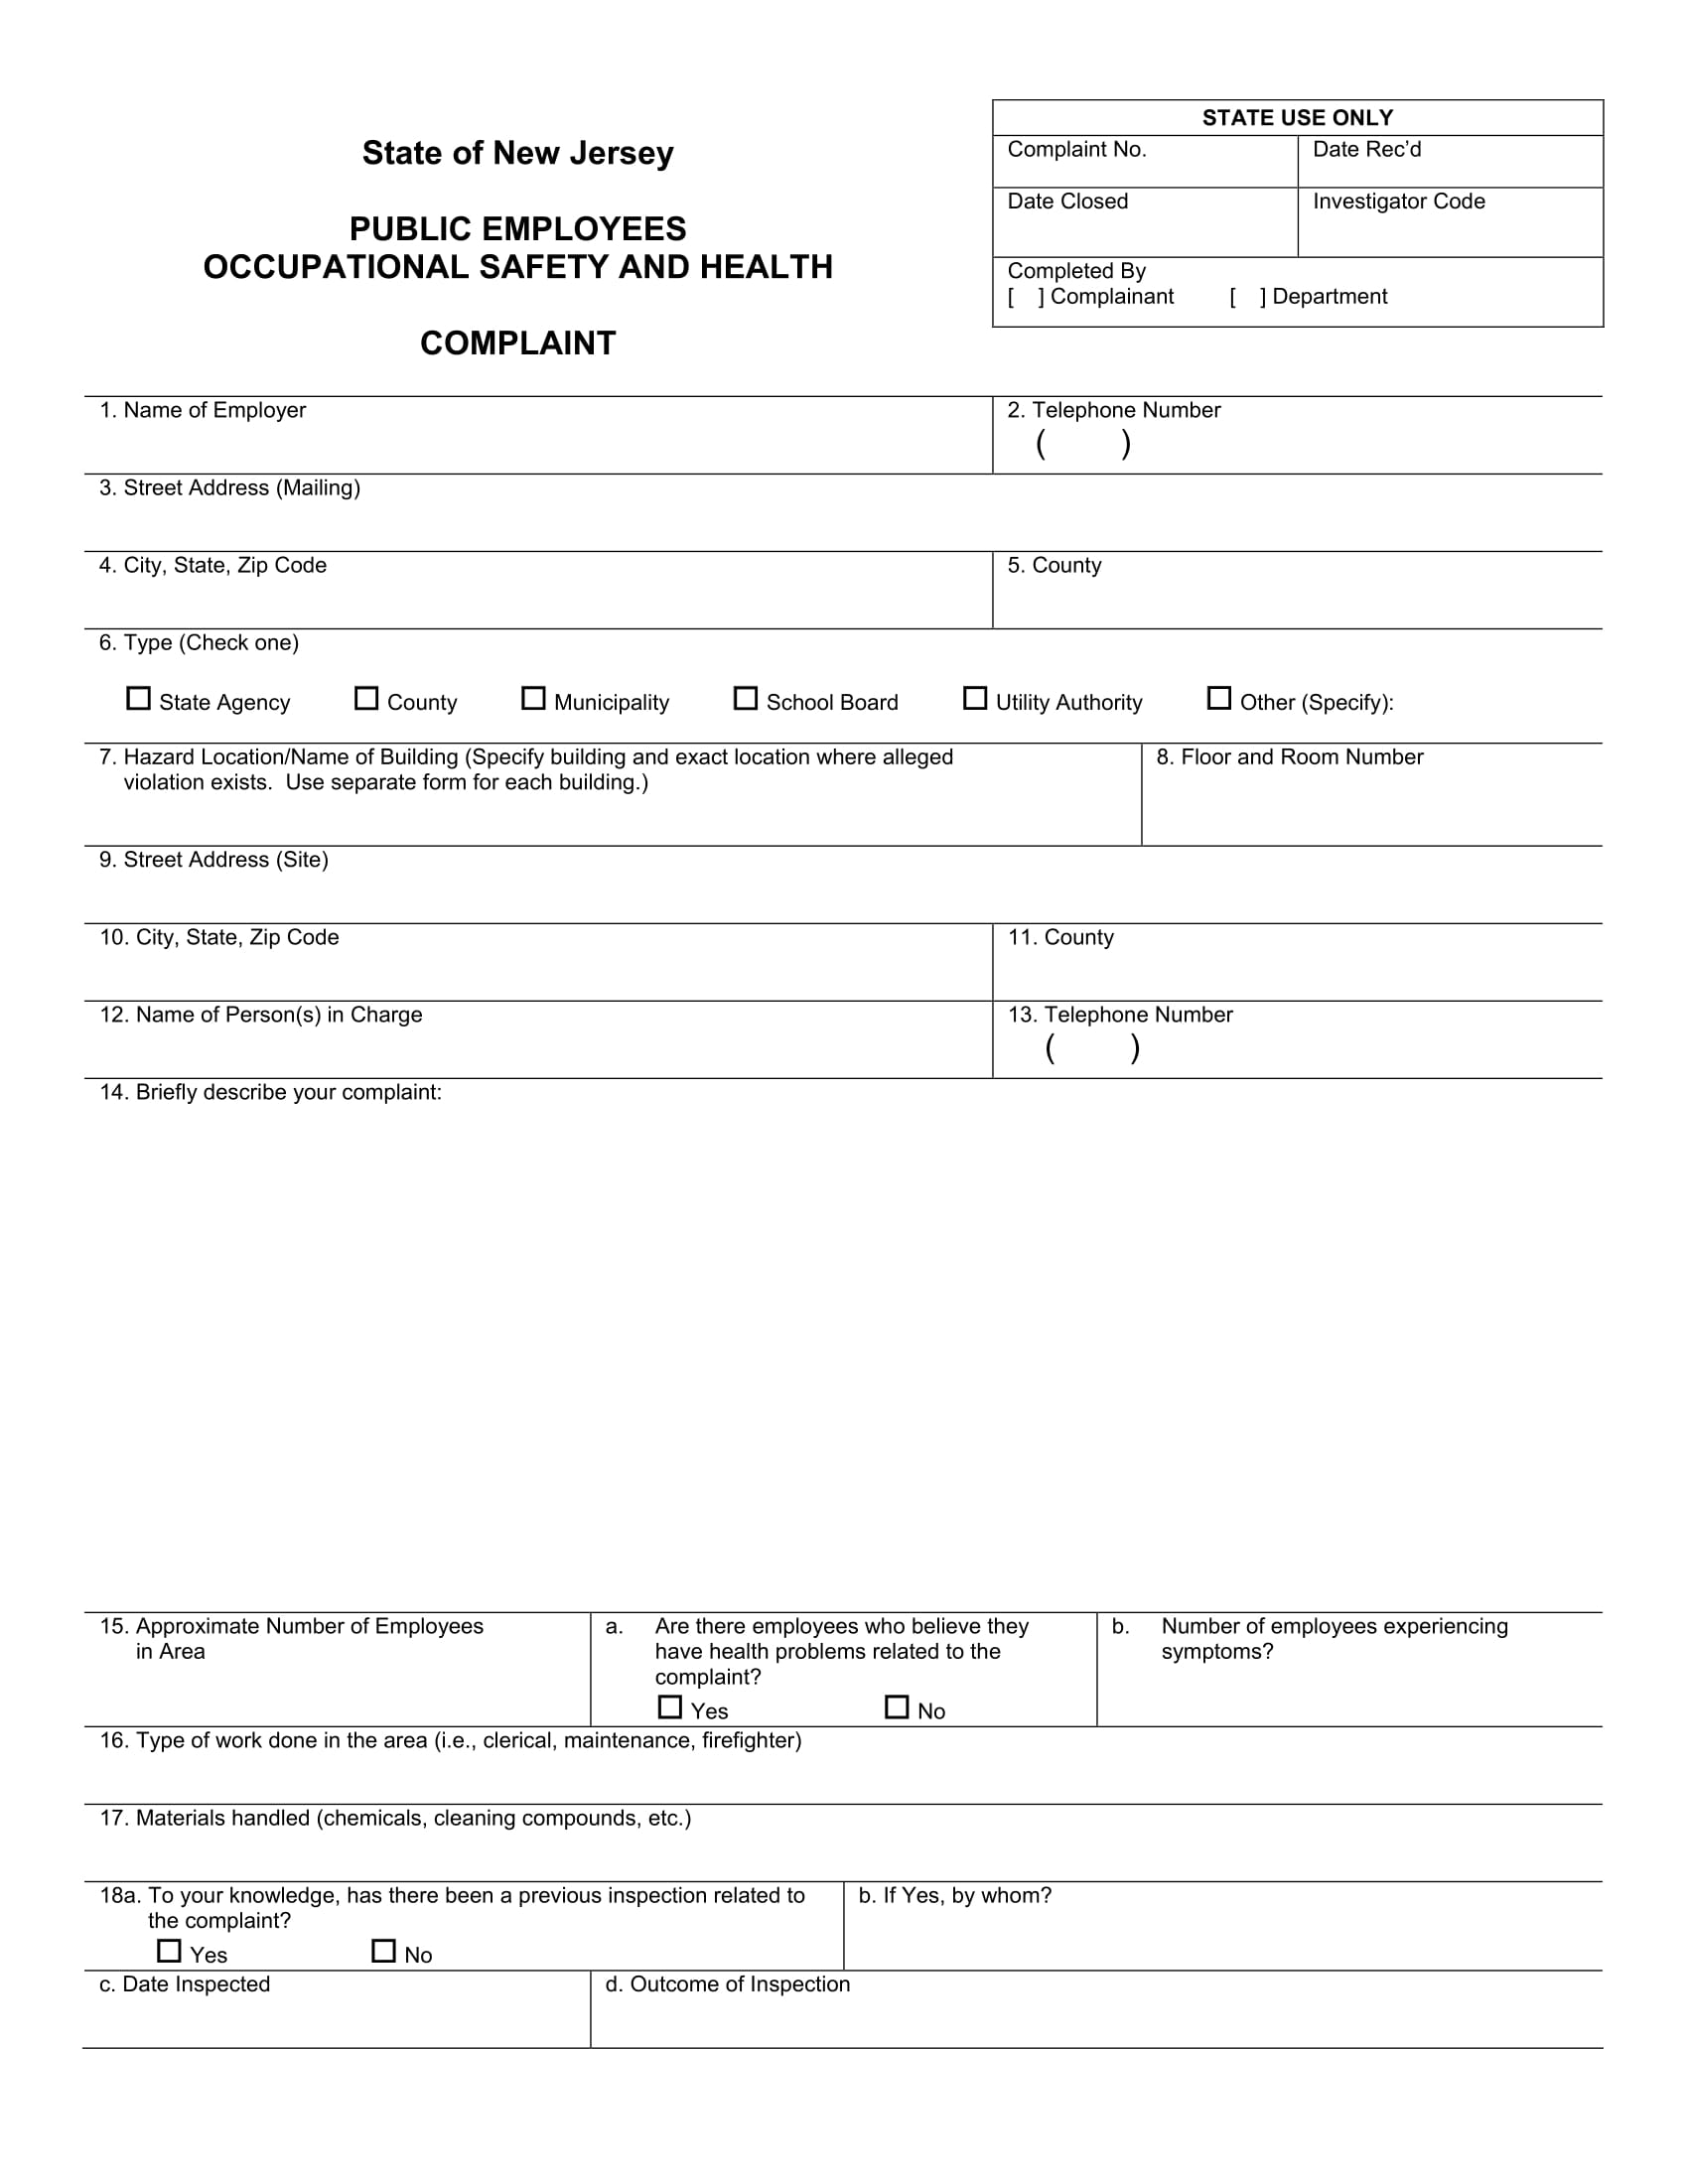 occupational safety and health complaint form 2